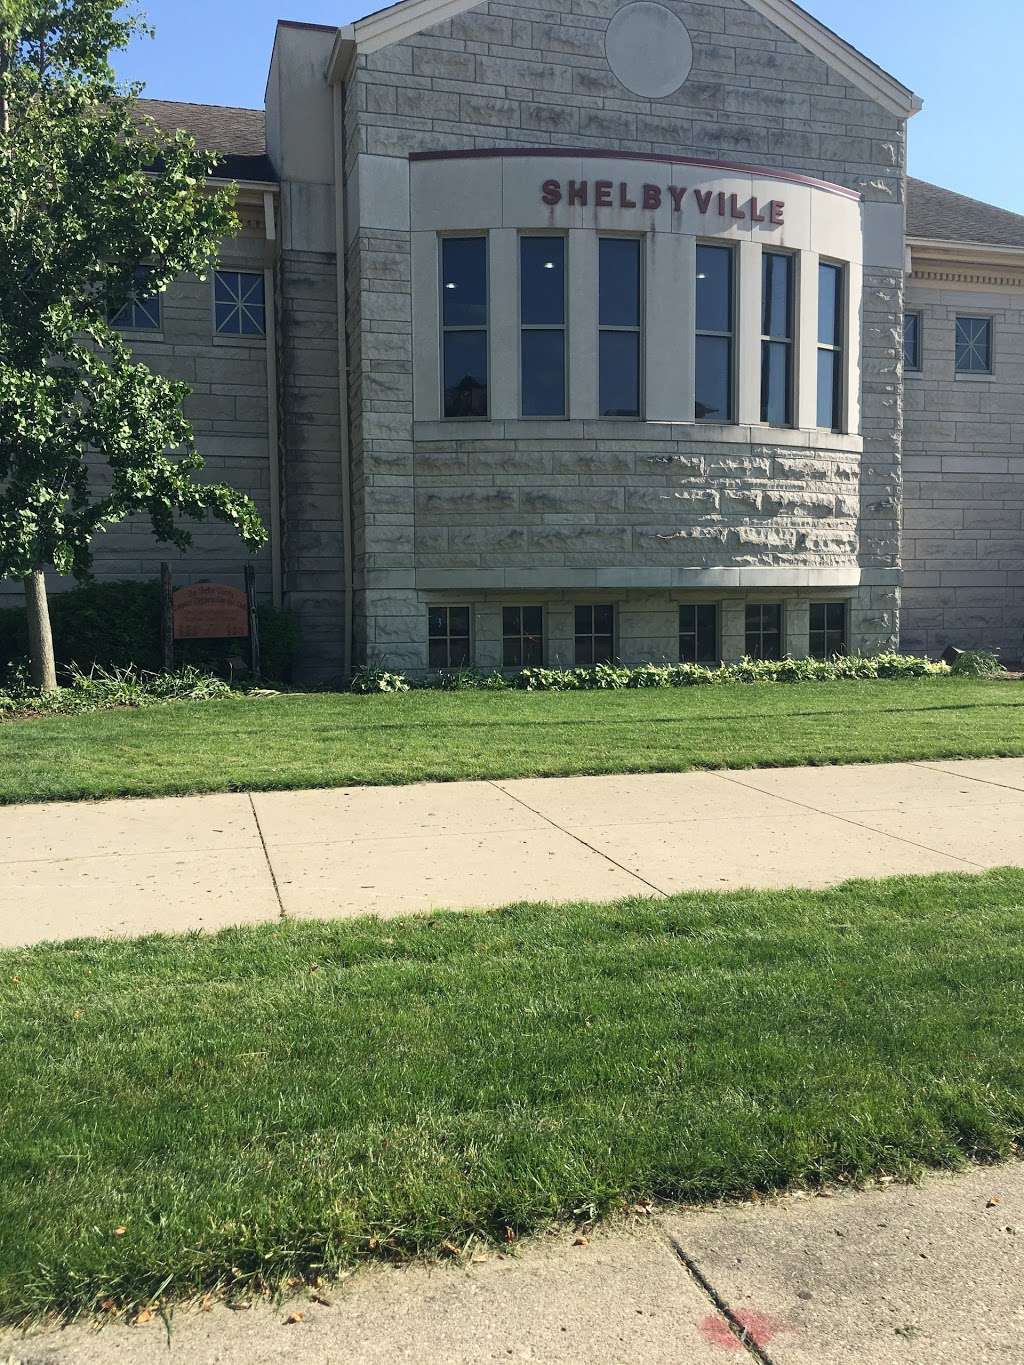 shelby township library